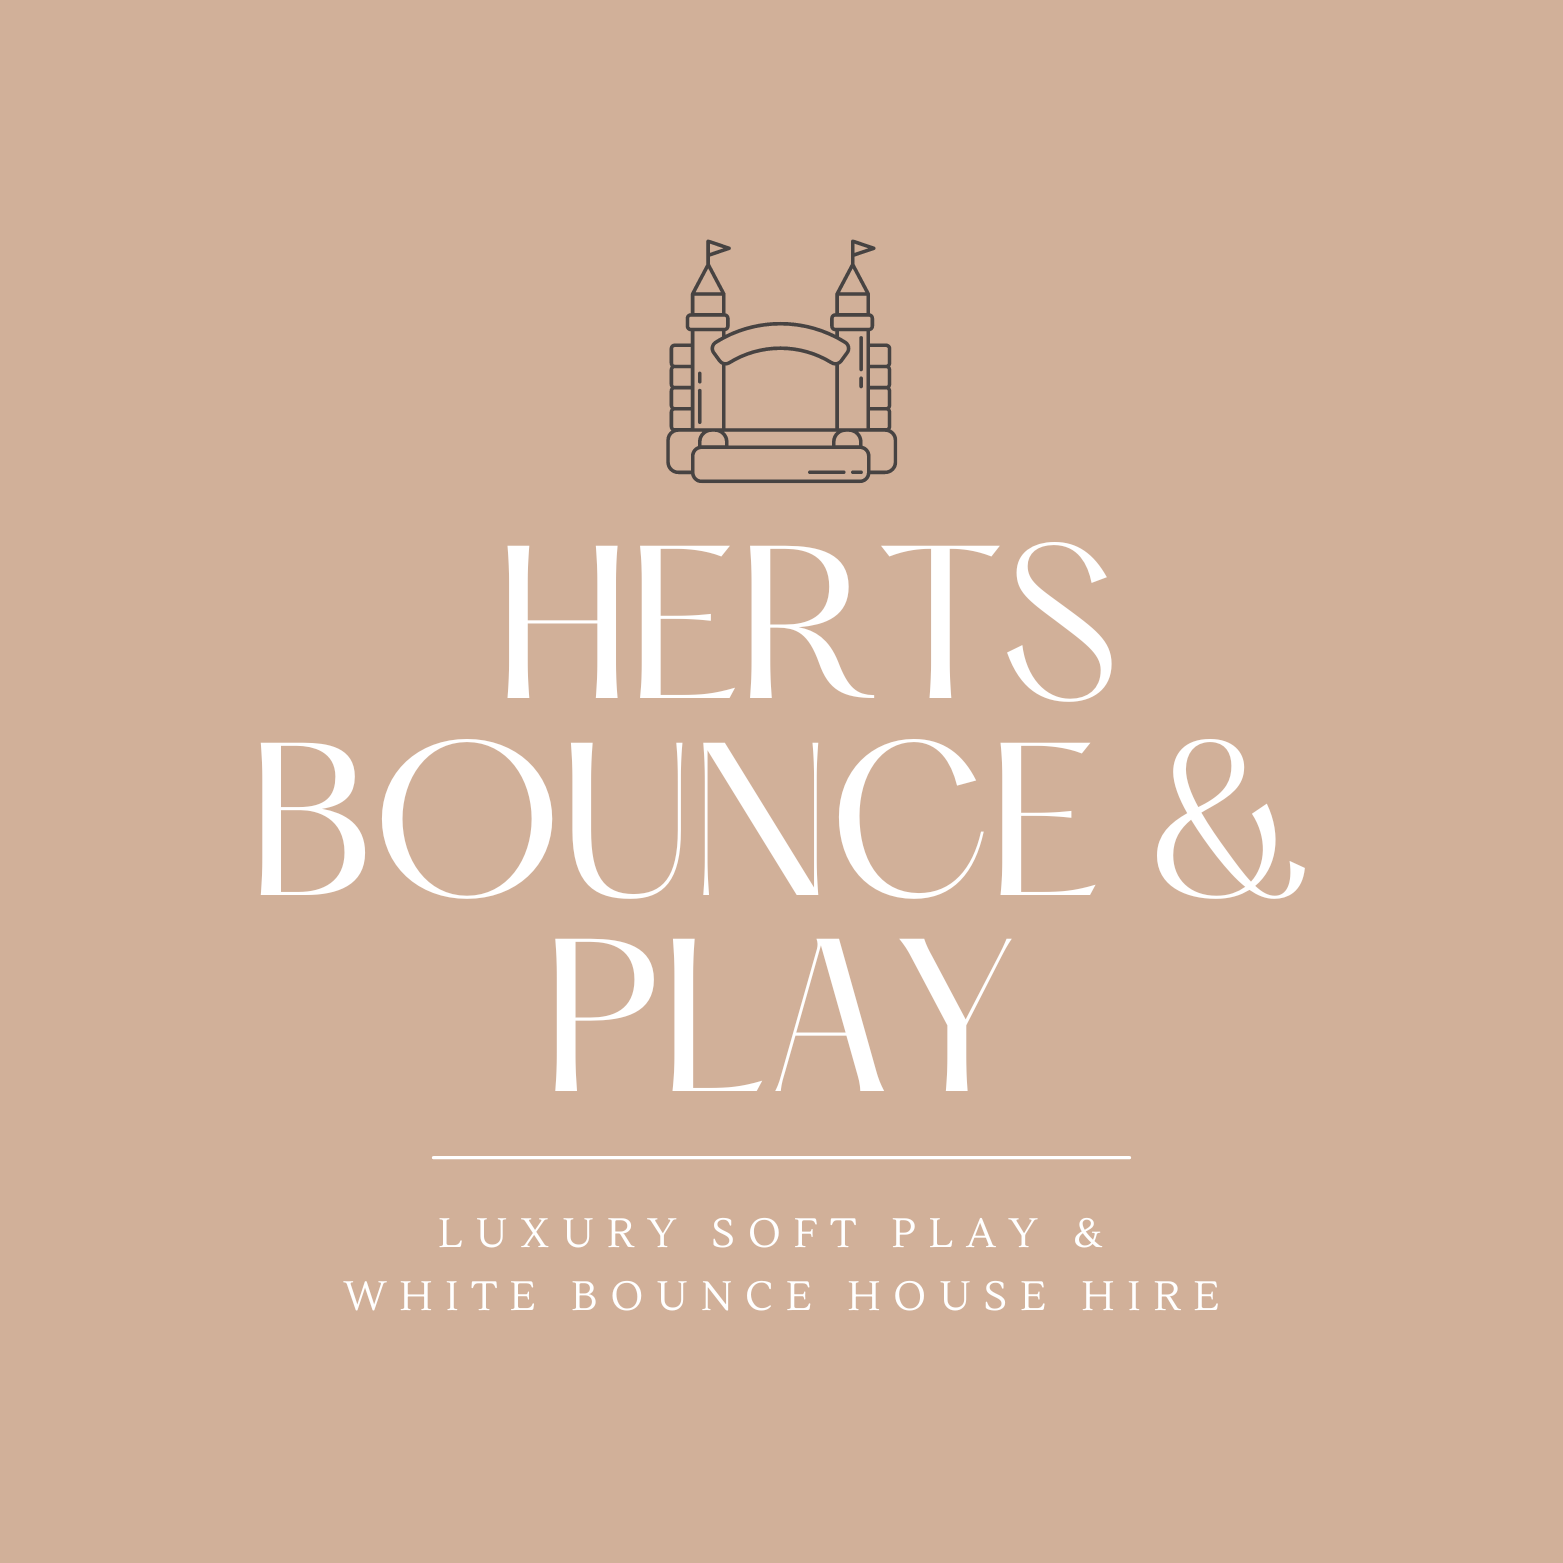 Herts Bounce & Play